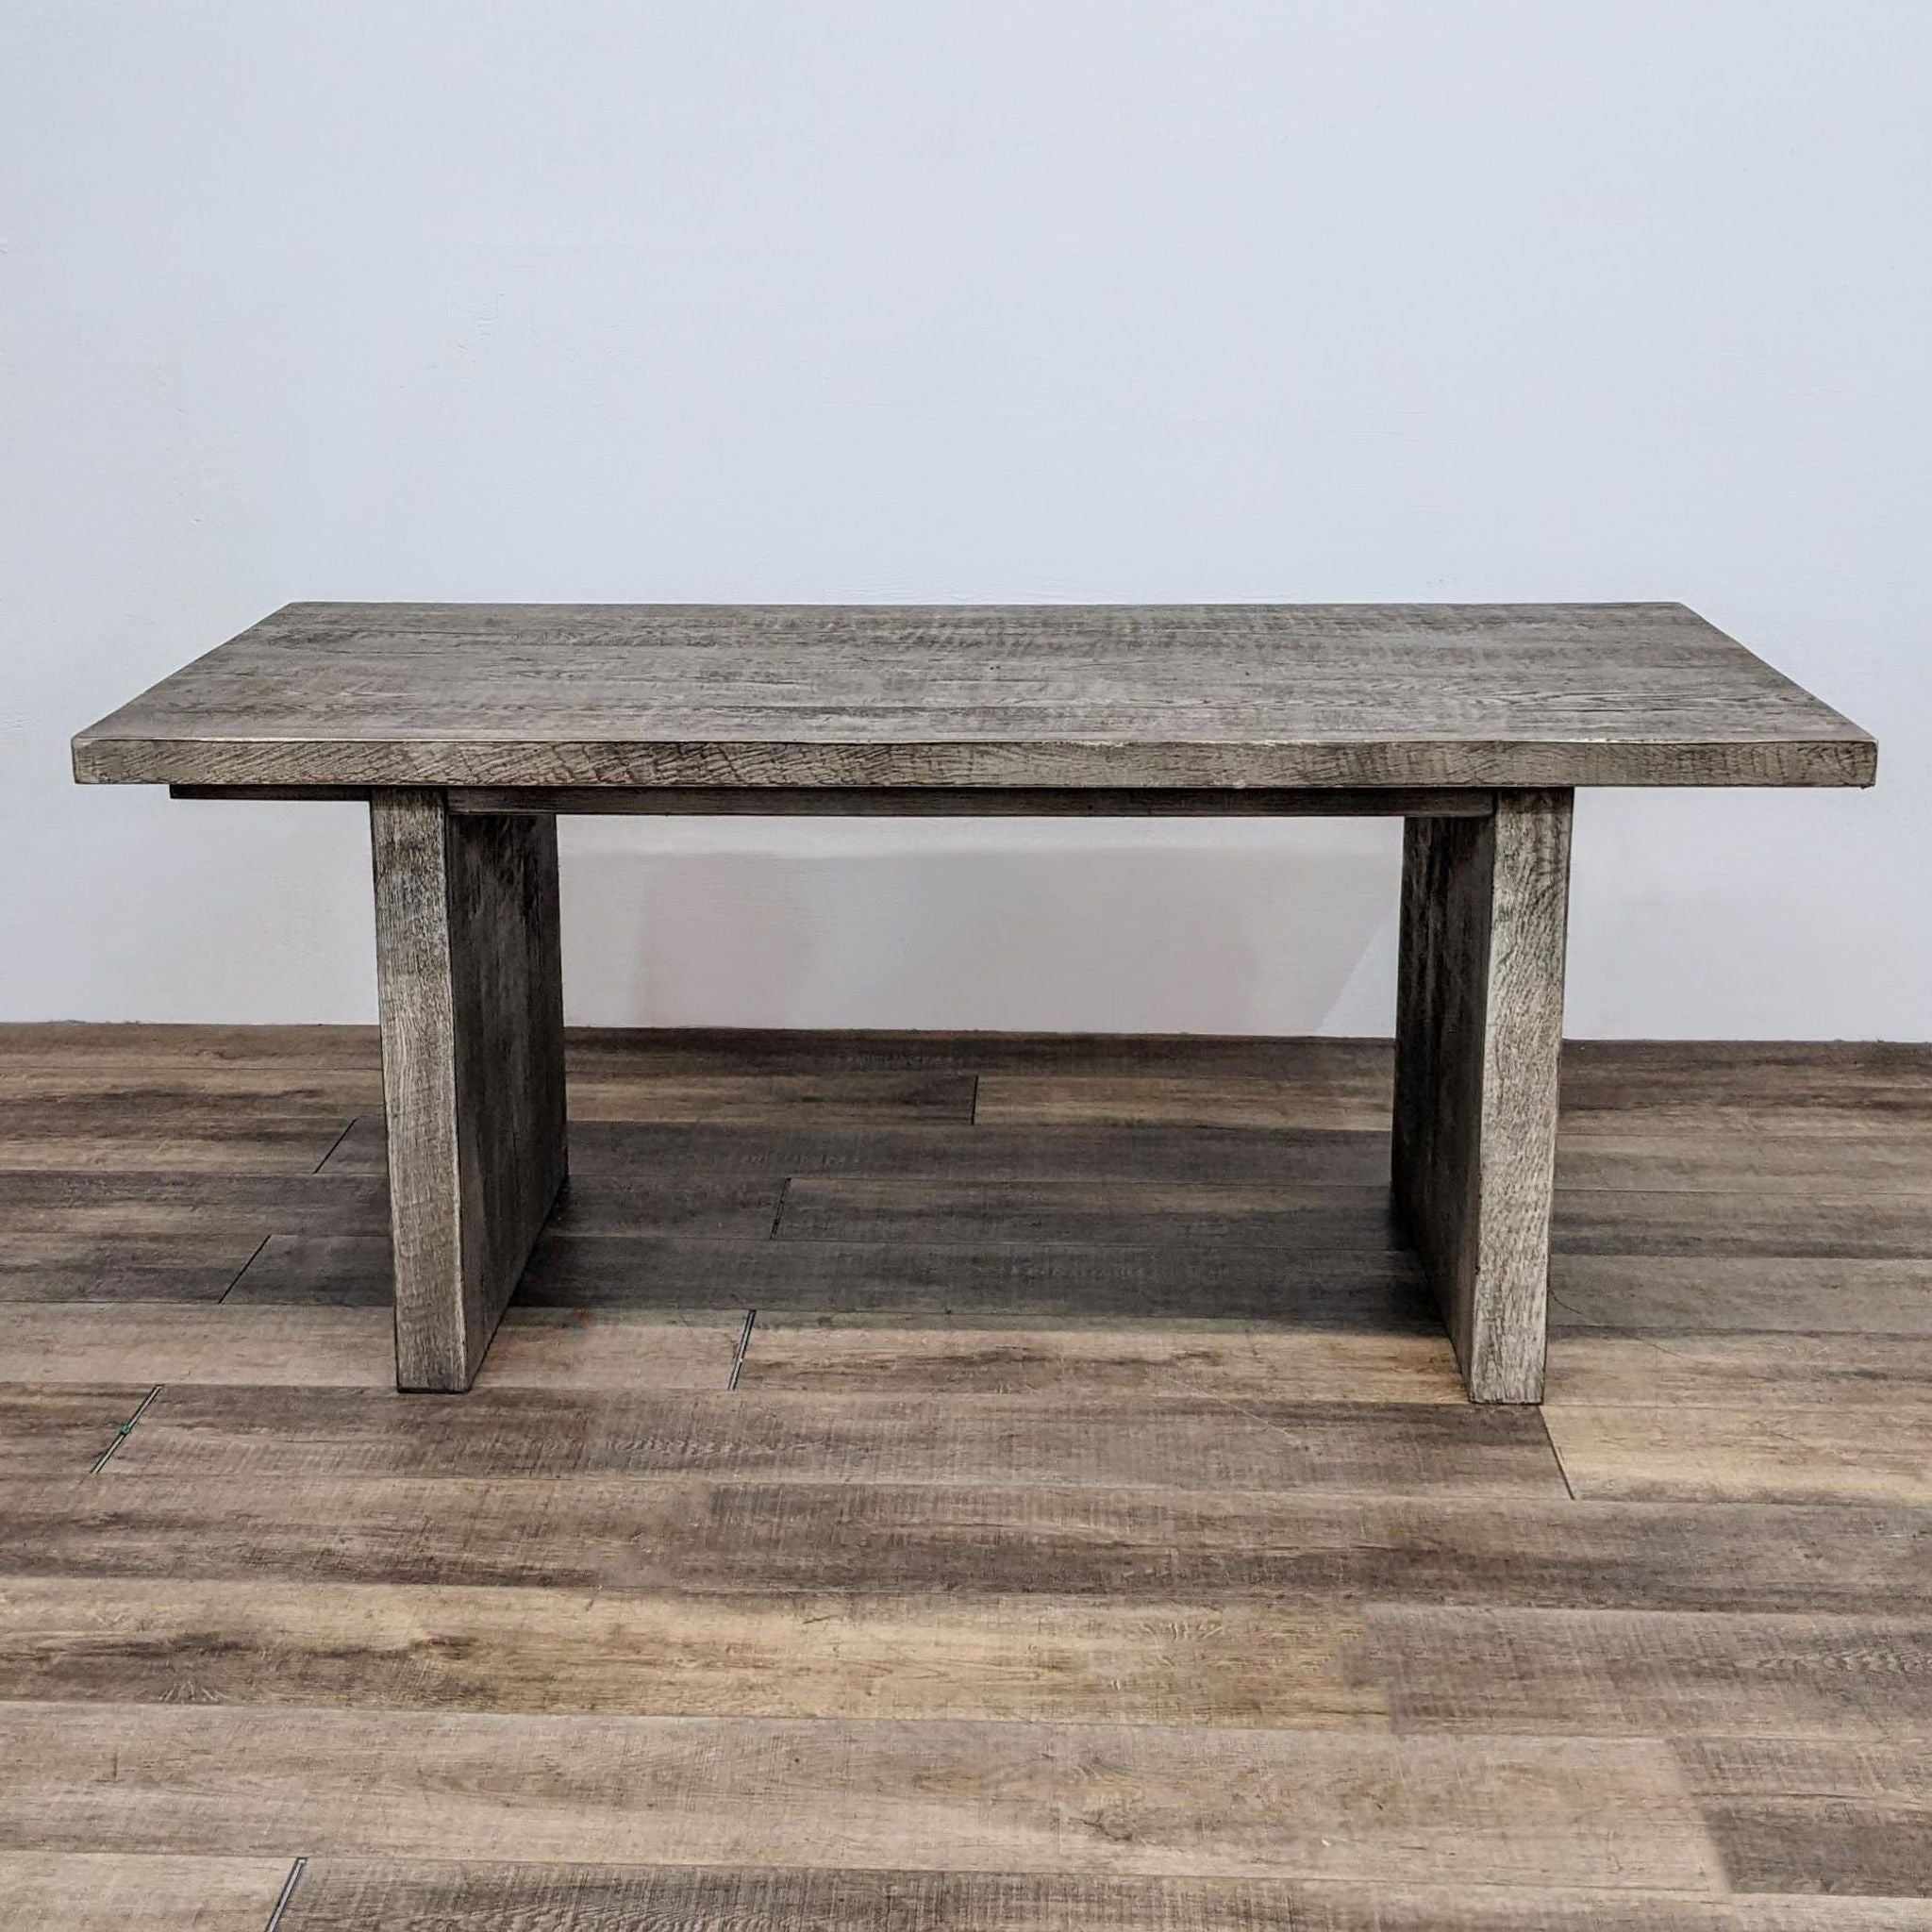 1. Rectangular Restoration Hardware dining table made from reclaimed oak with a distressed finish.